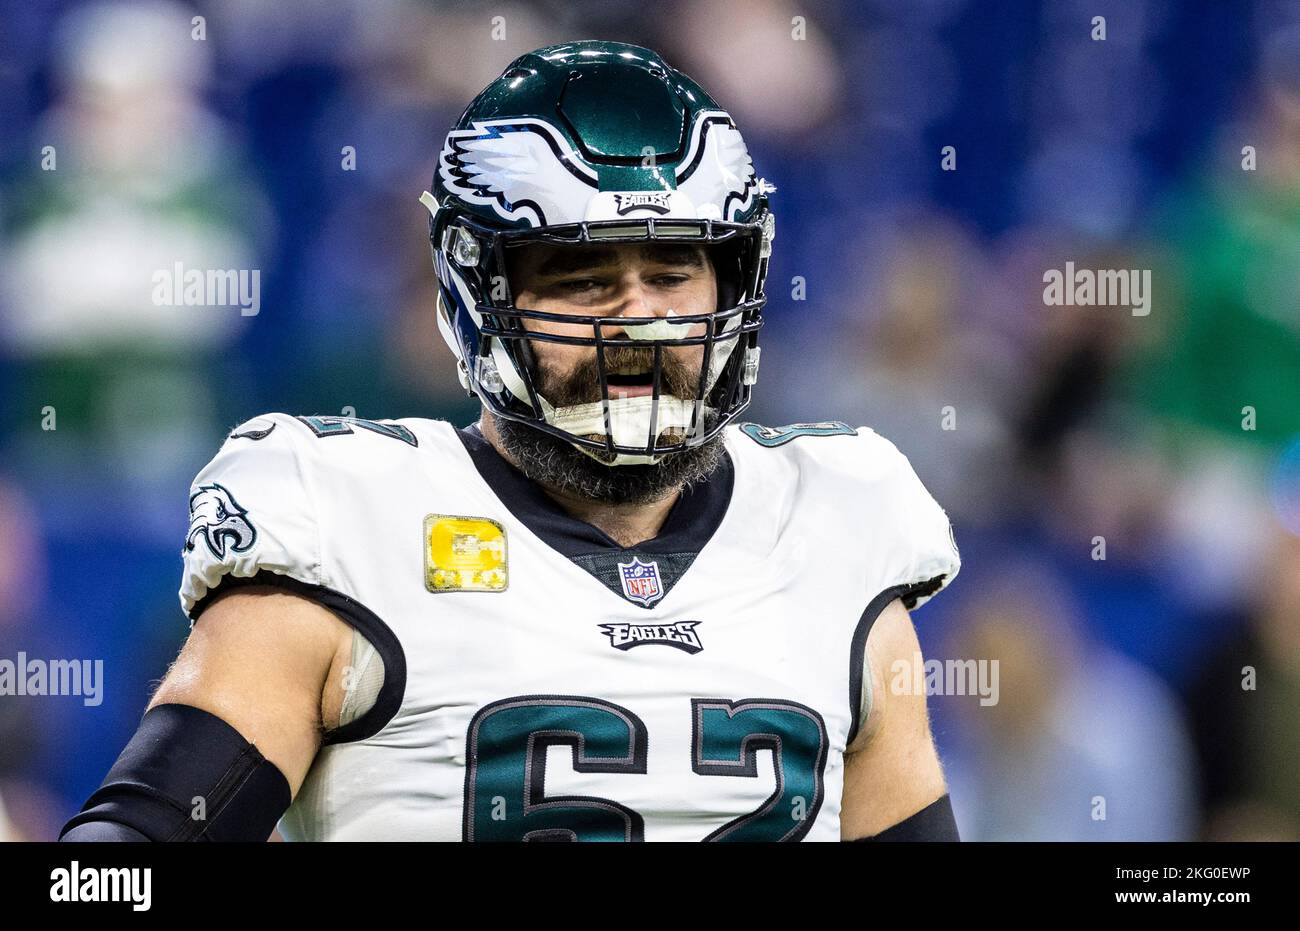 Download Jason Kelce in action during a game Wallpaper  Wallpaperscom